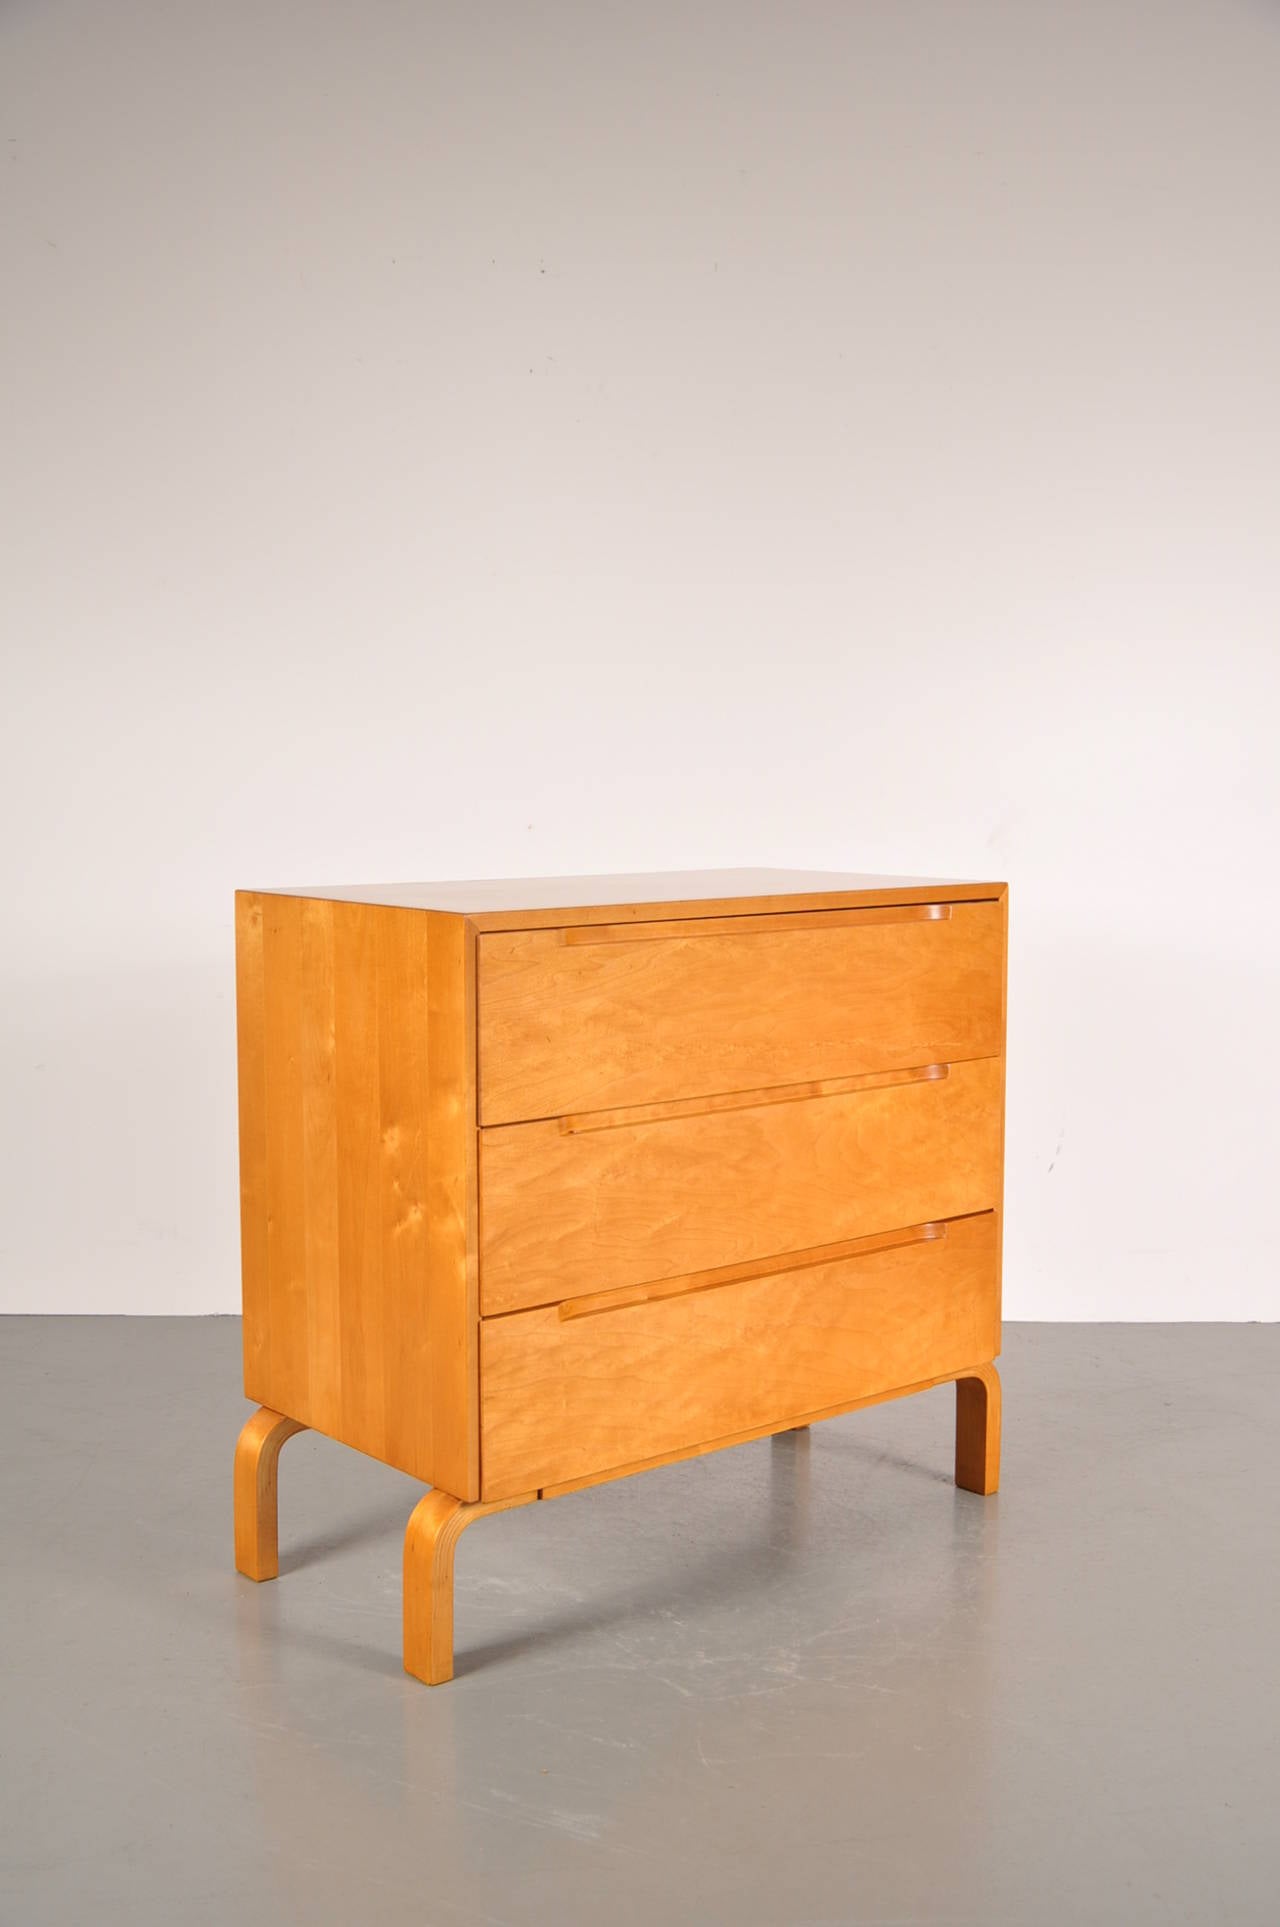 Unique drawer cabinet designed by Alvar Aalto for Artek Finland, manufactured around 1950.

The cabinet has been professional restored and is in excellent condition. It is made of high quality birch on plywood legs.

In excellent condition with